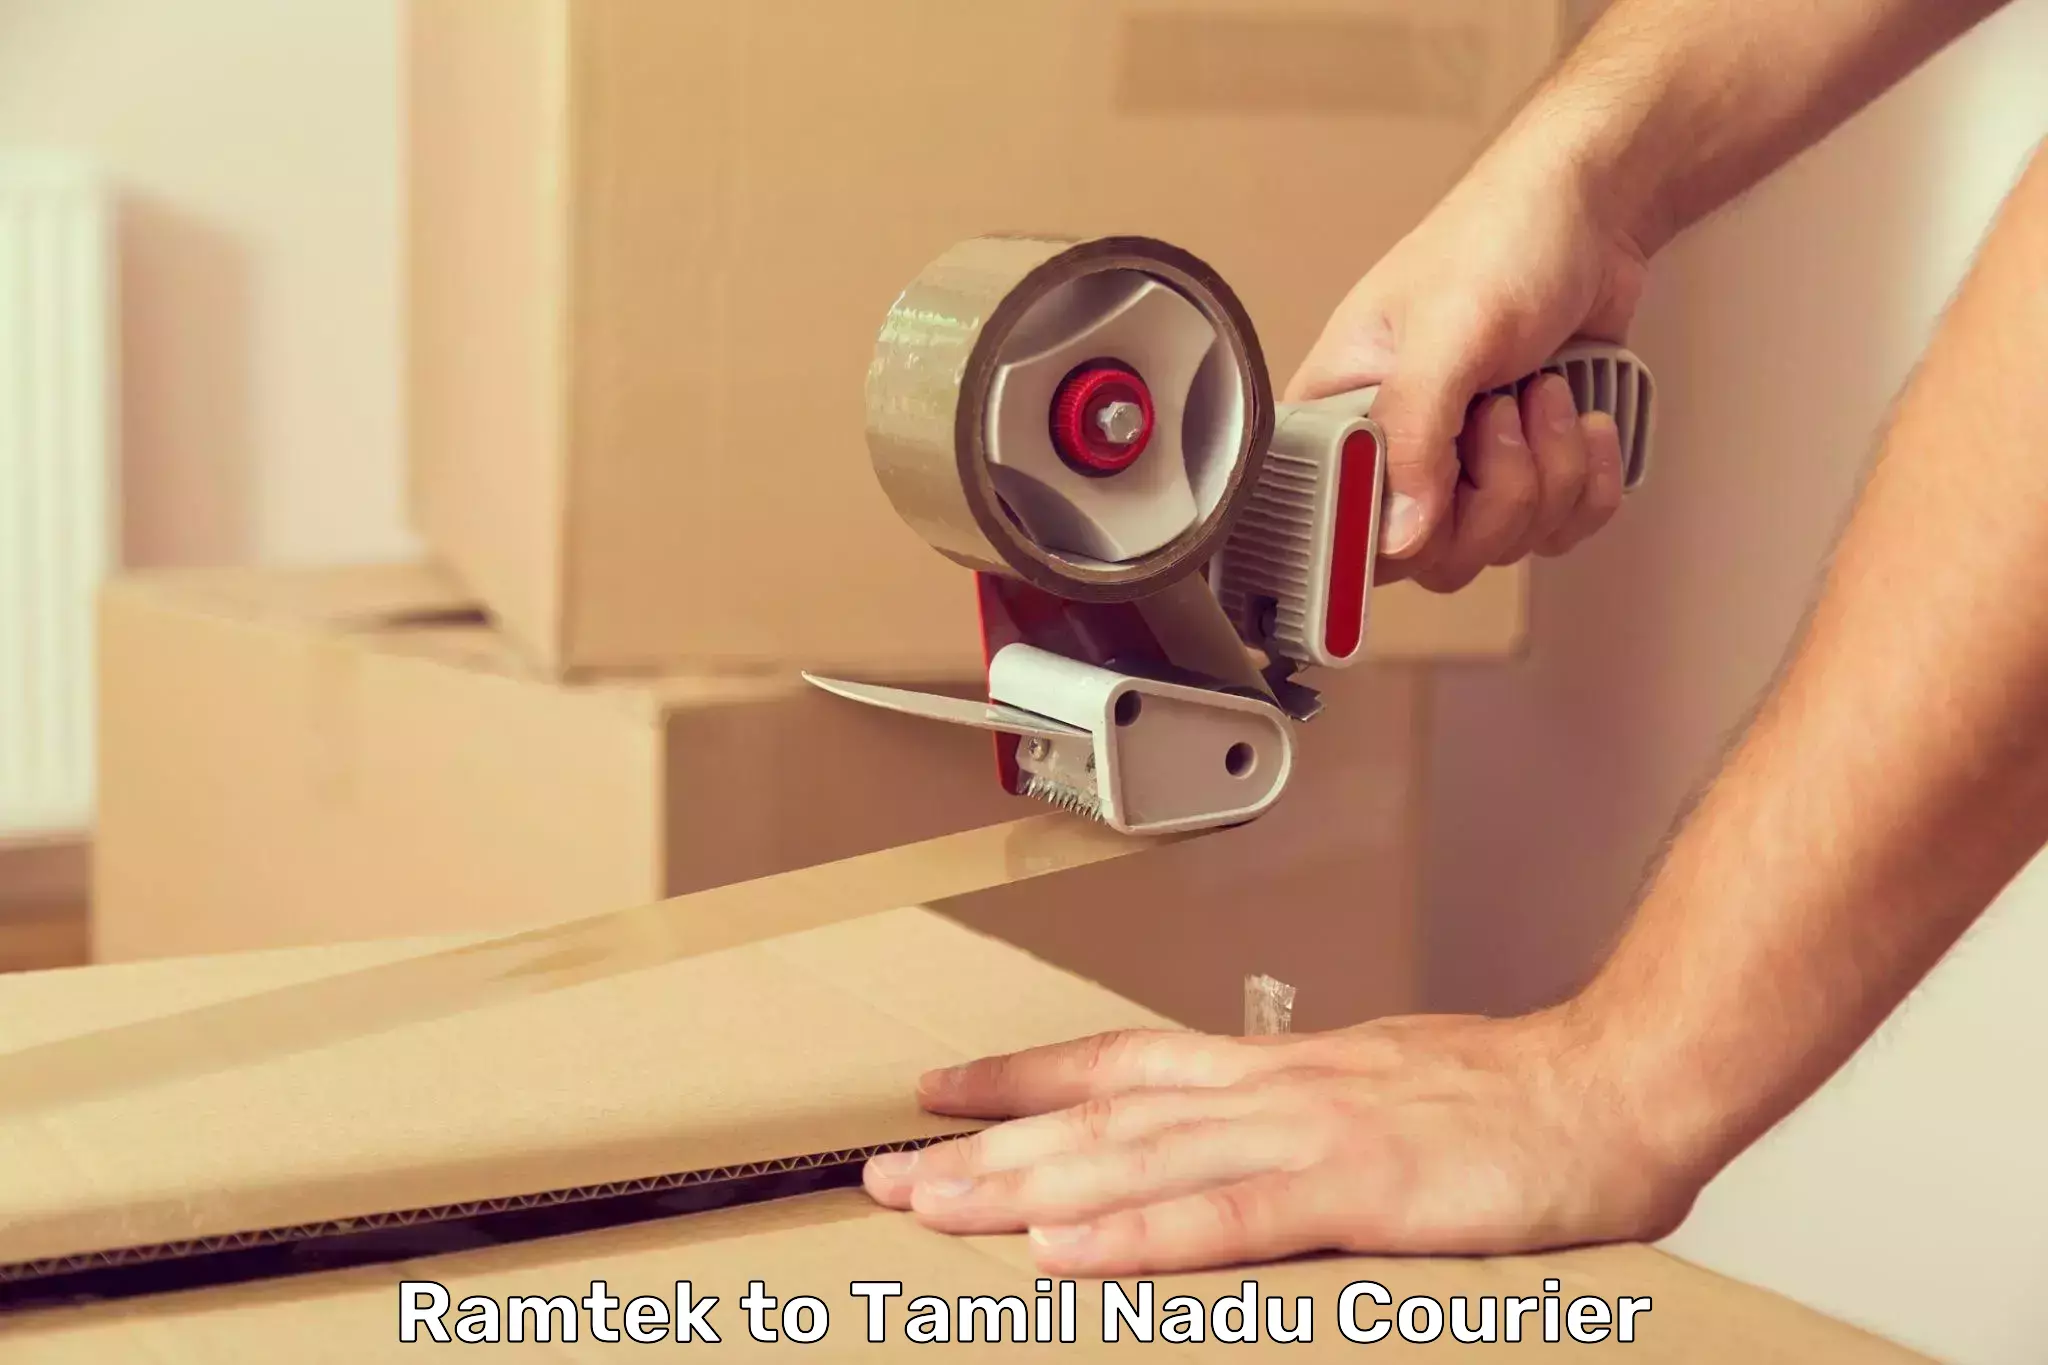 Efficient courier operations Ramtek to Papanasam